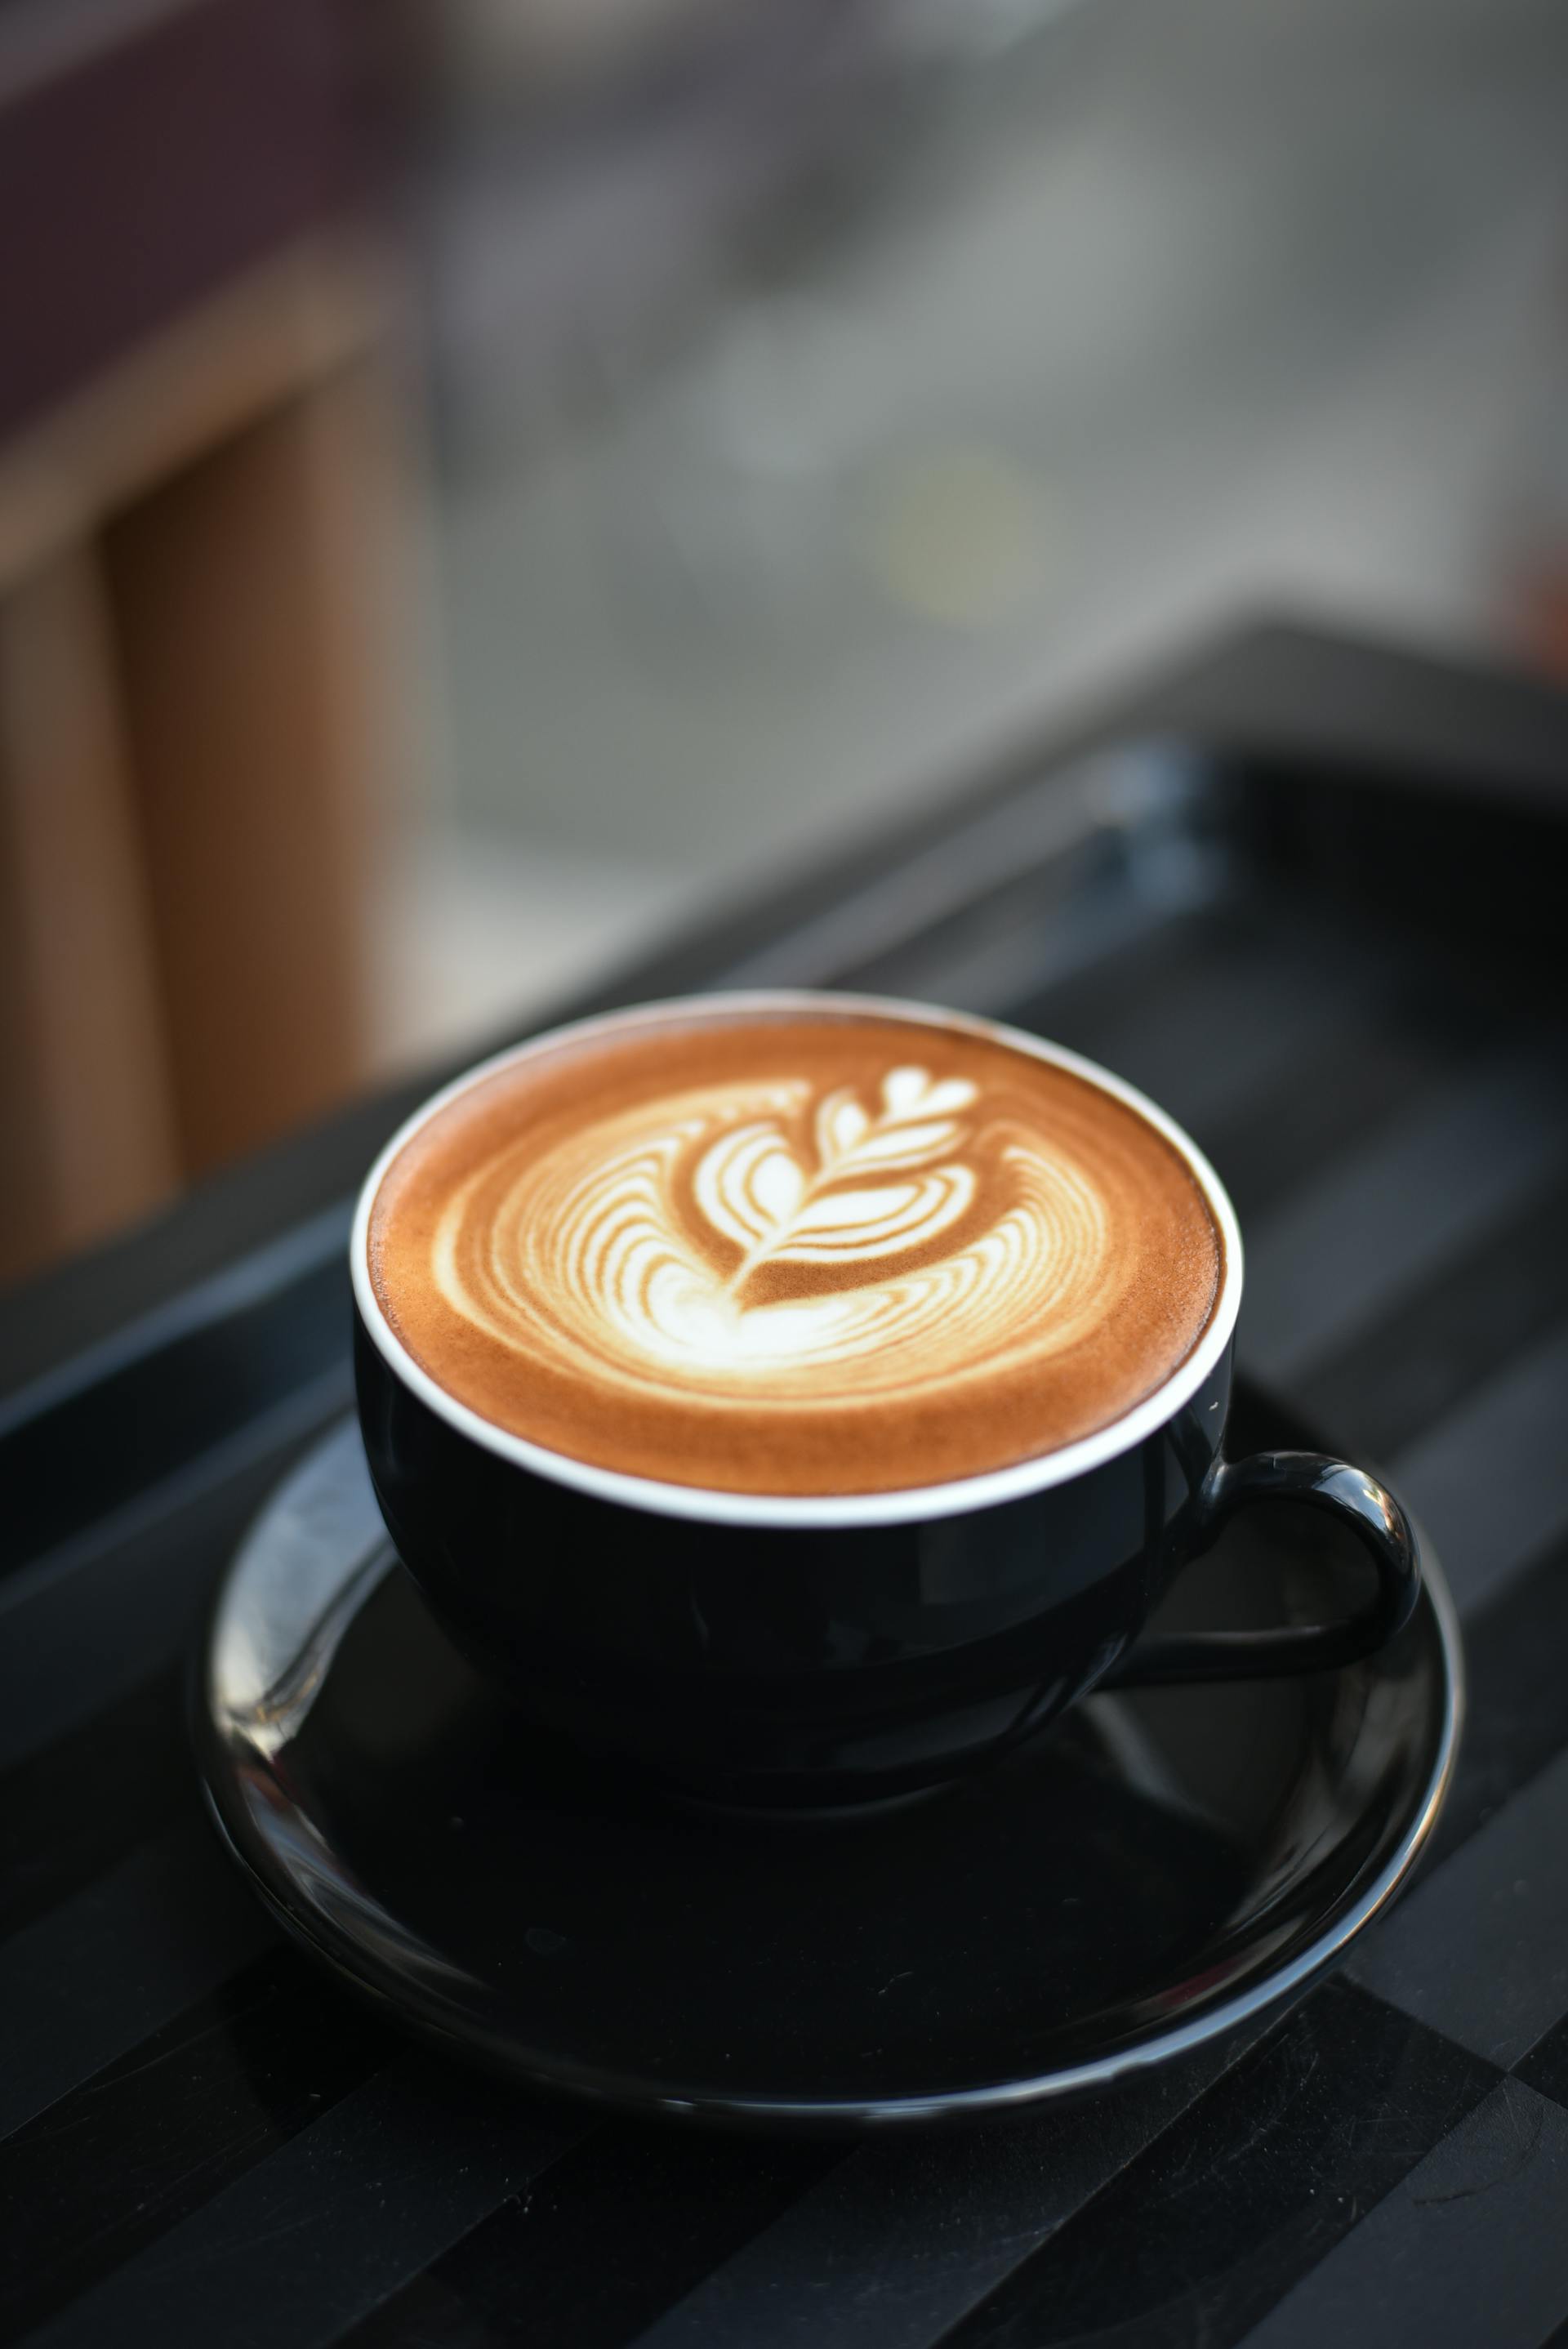 A cup of coffee | Source: Pexels